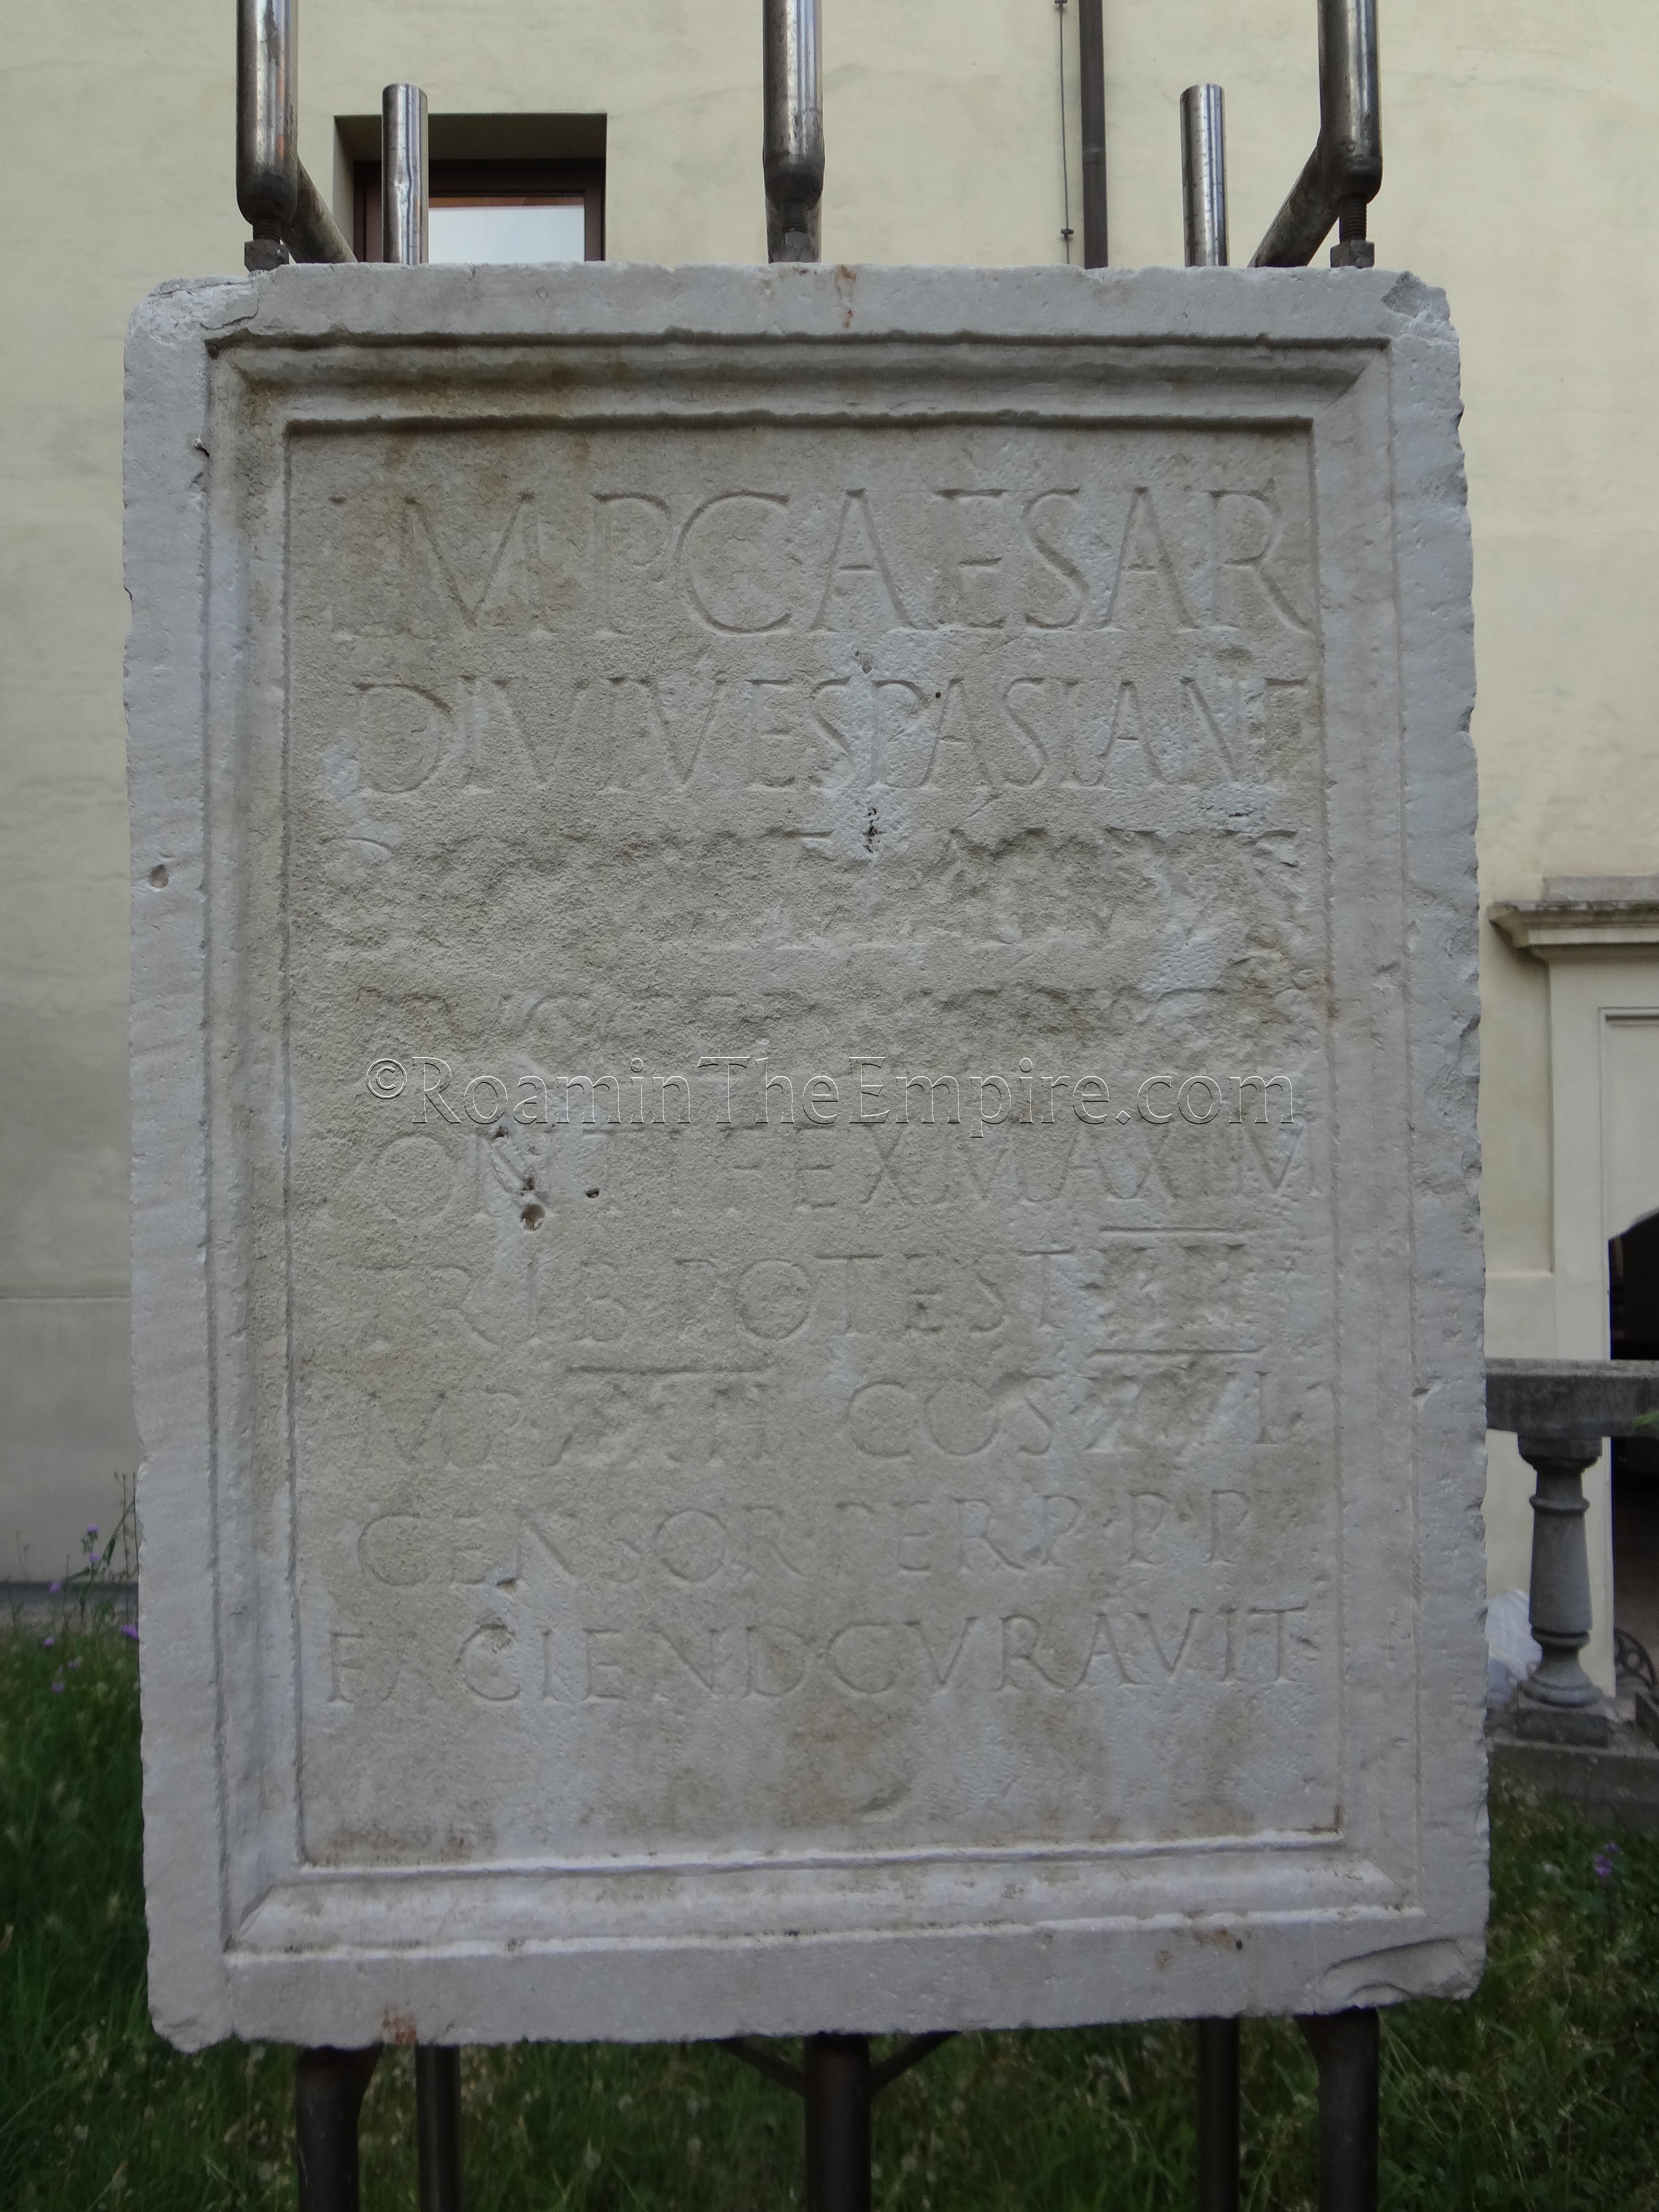 Inscription noting the construction of works by Domitian, whose name is removed in damnatio memoriae, in 93 CE. Found on the Via Flaminia outside Rimini, now in the lapidary garden of the Museo della Città.